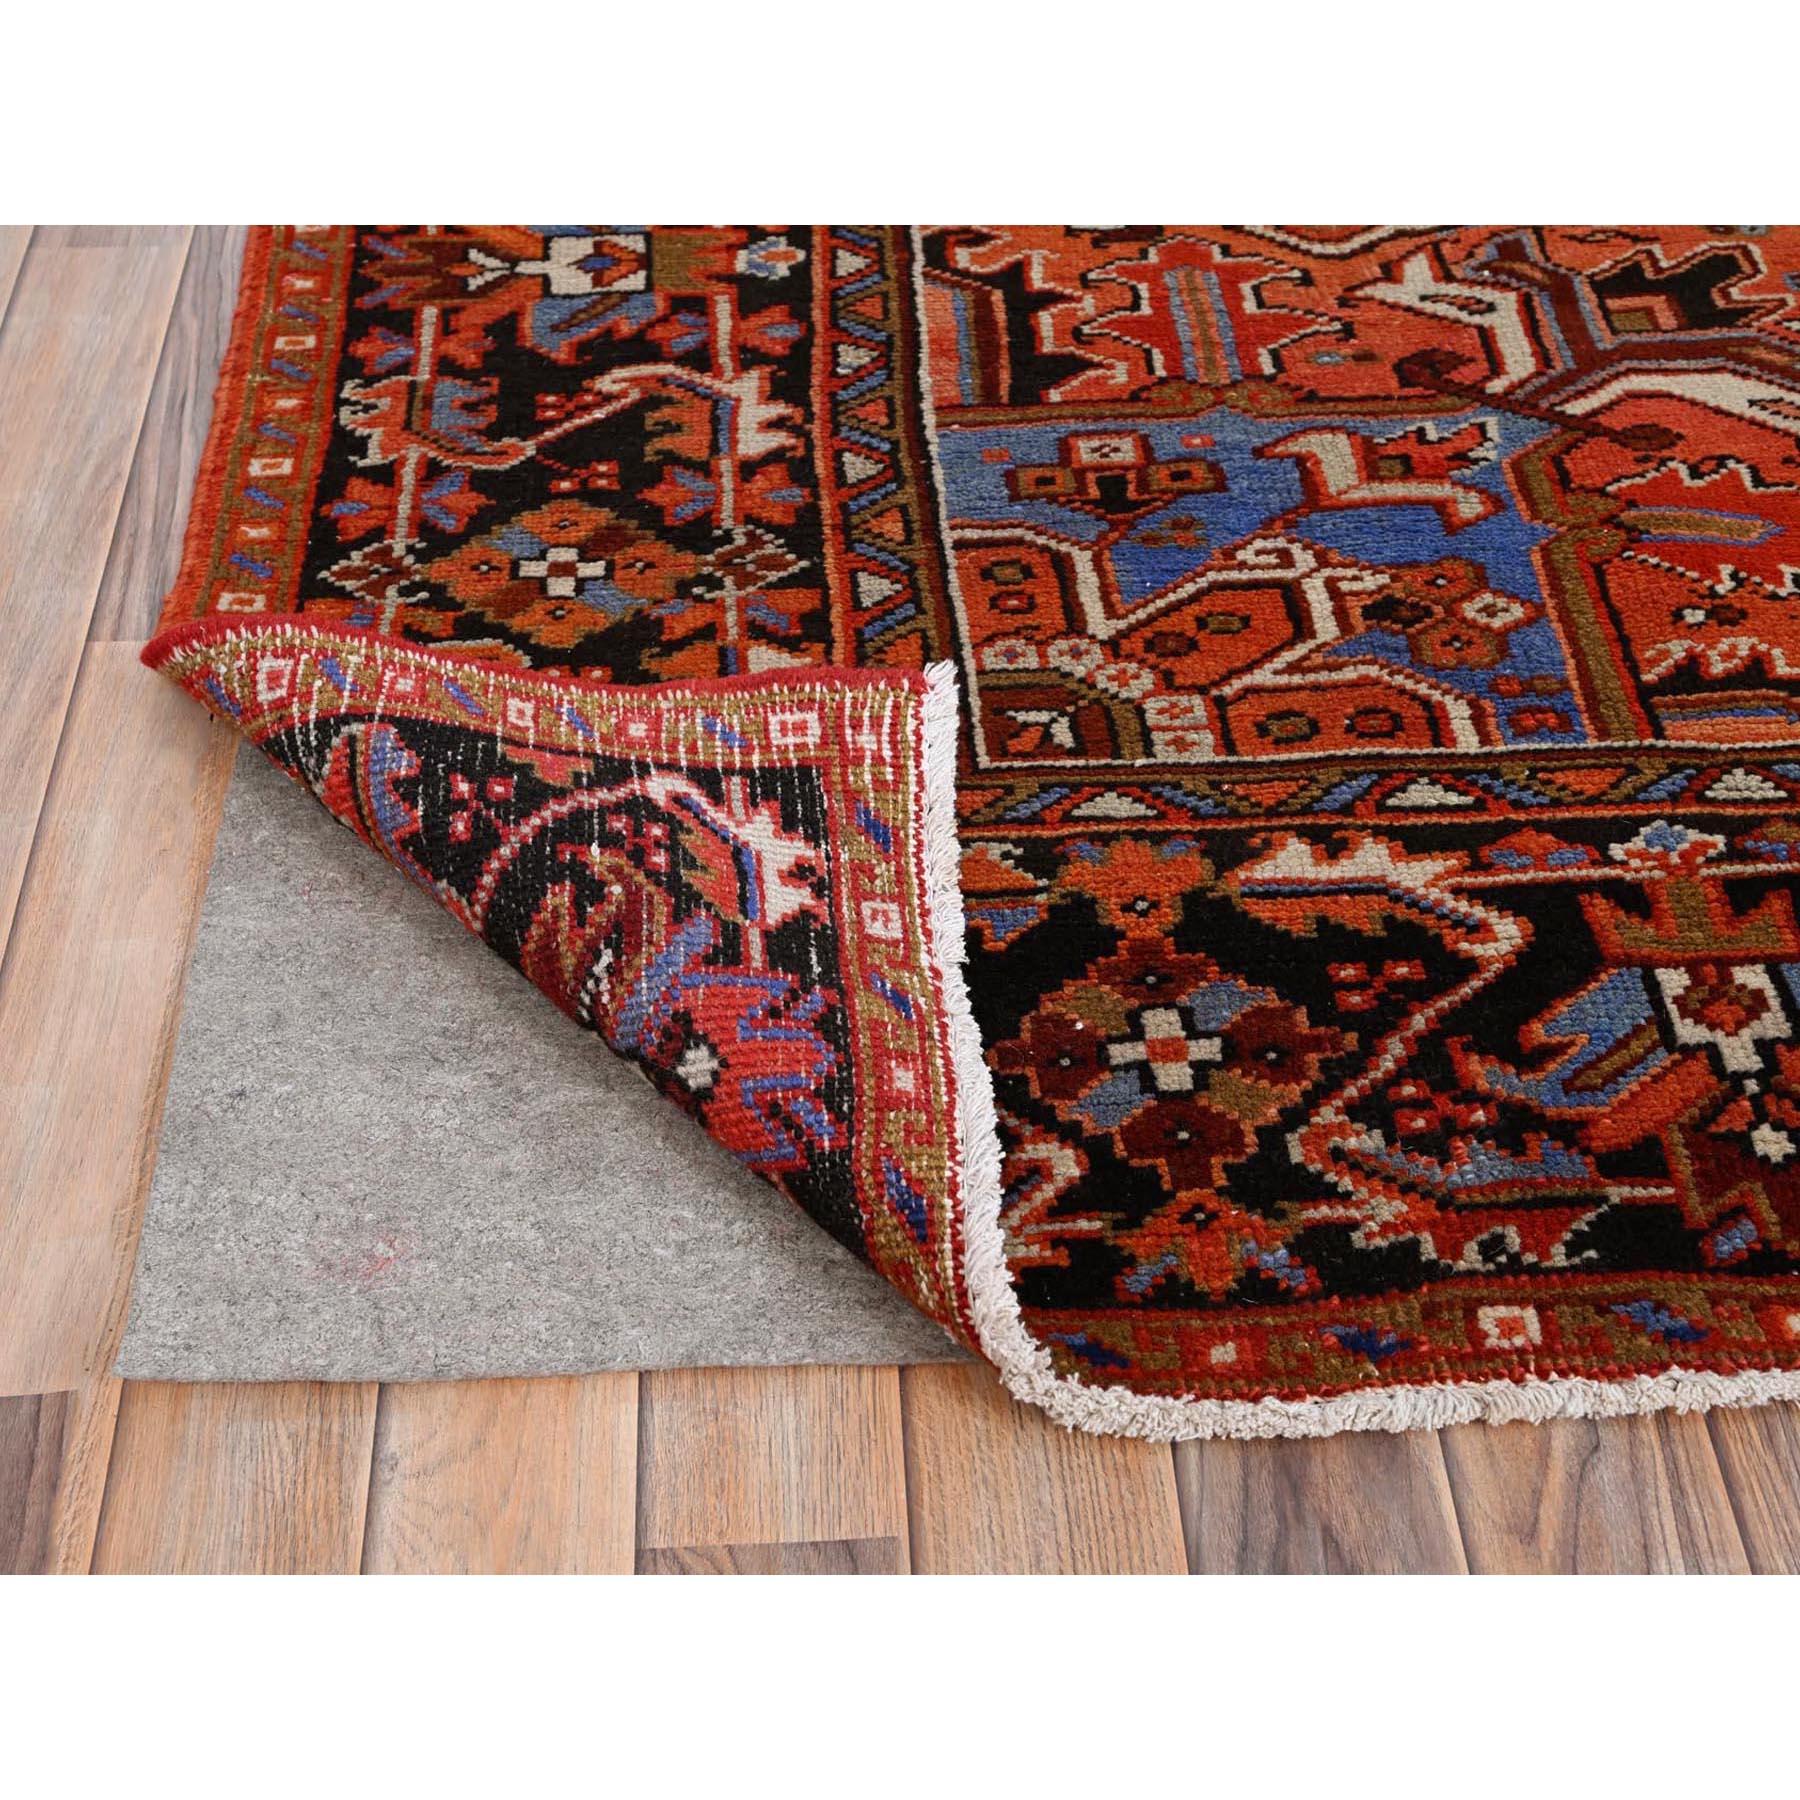 Mid-20th Century Red Vintage Persian Heriz Good Condition Rustic Feel Worn Wool Hand Knotted Rug